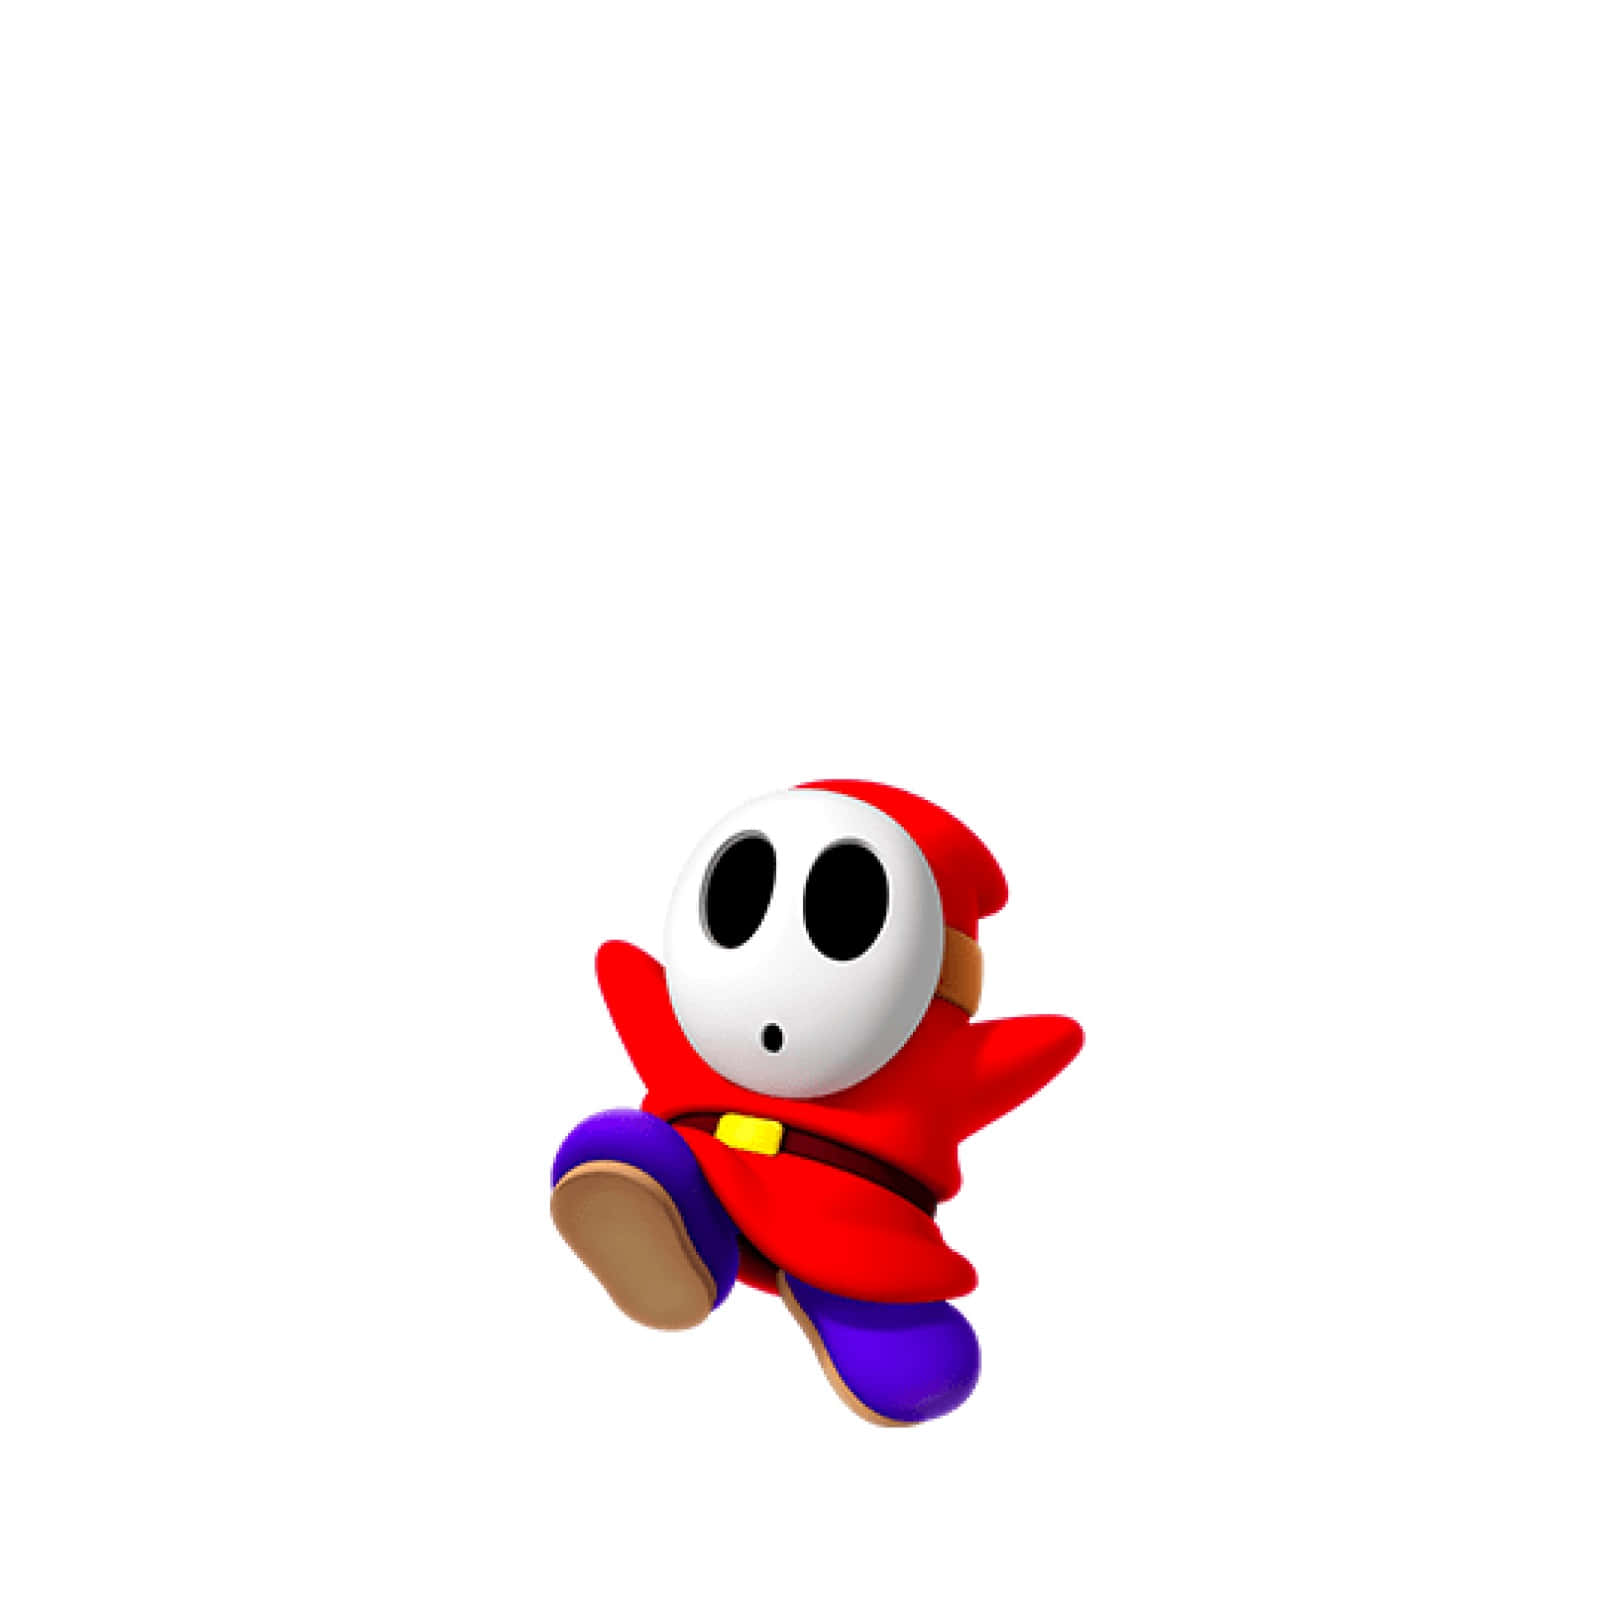 A Shy Guy Hiding Behind Blooming Flowers Wallpaper